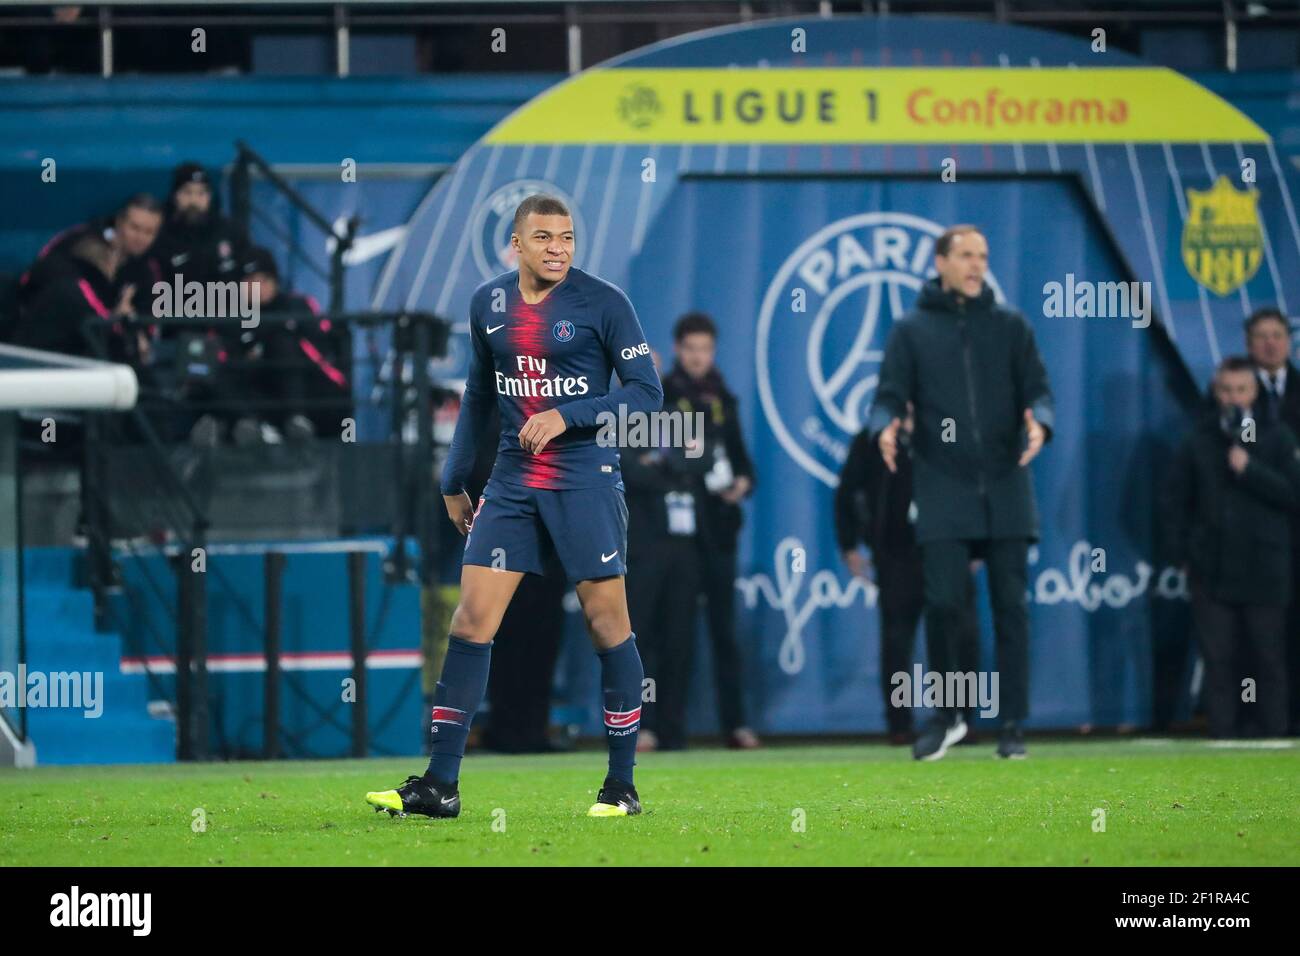 Kylian Mbappe (PSG) after missed to score, Thomas TUCHEL (PSG) in the  background reacted during the French championship Ligue 1 football match  between Paris Saint-Germain and FC Nantes on December 22, 2018